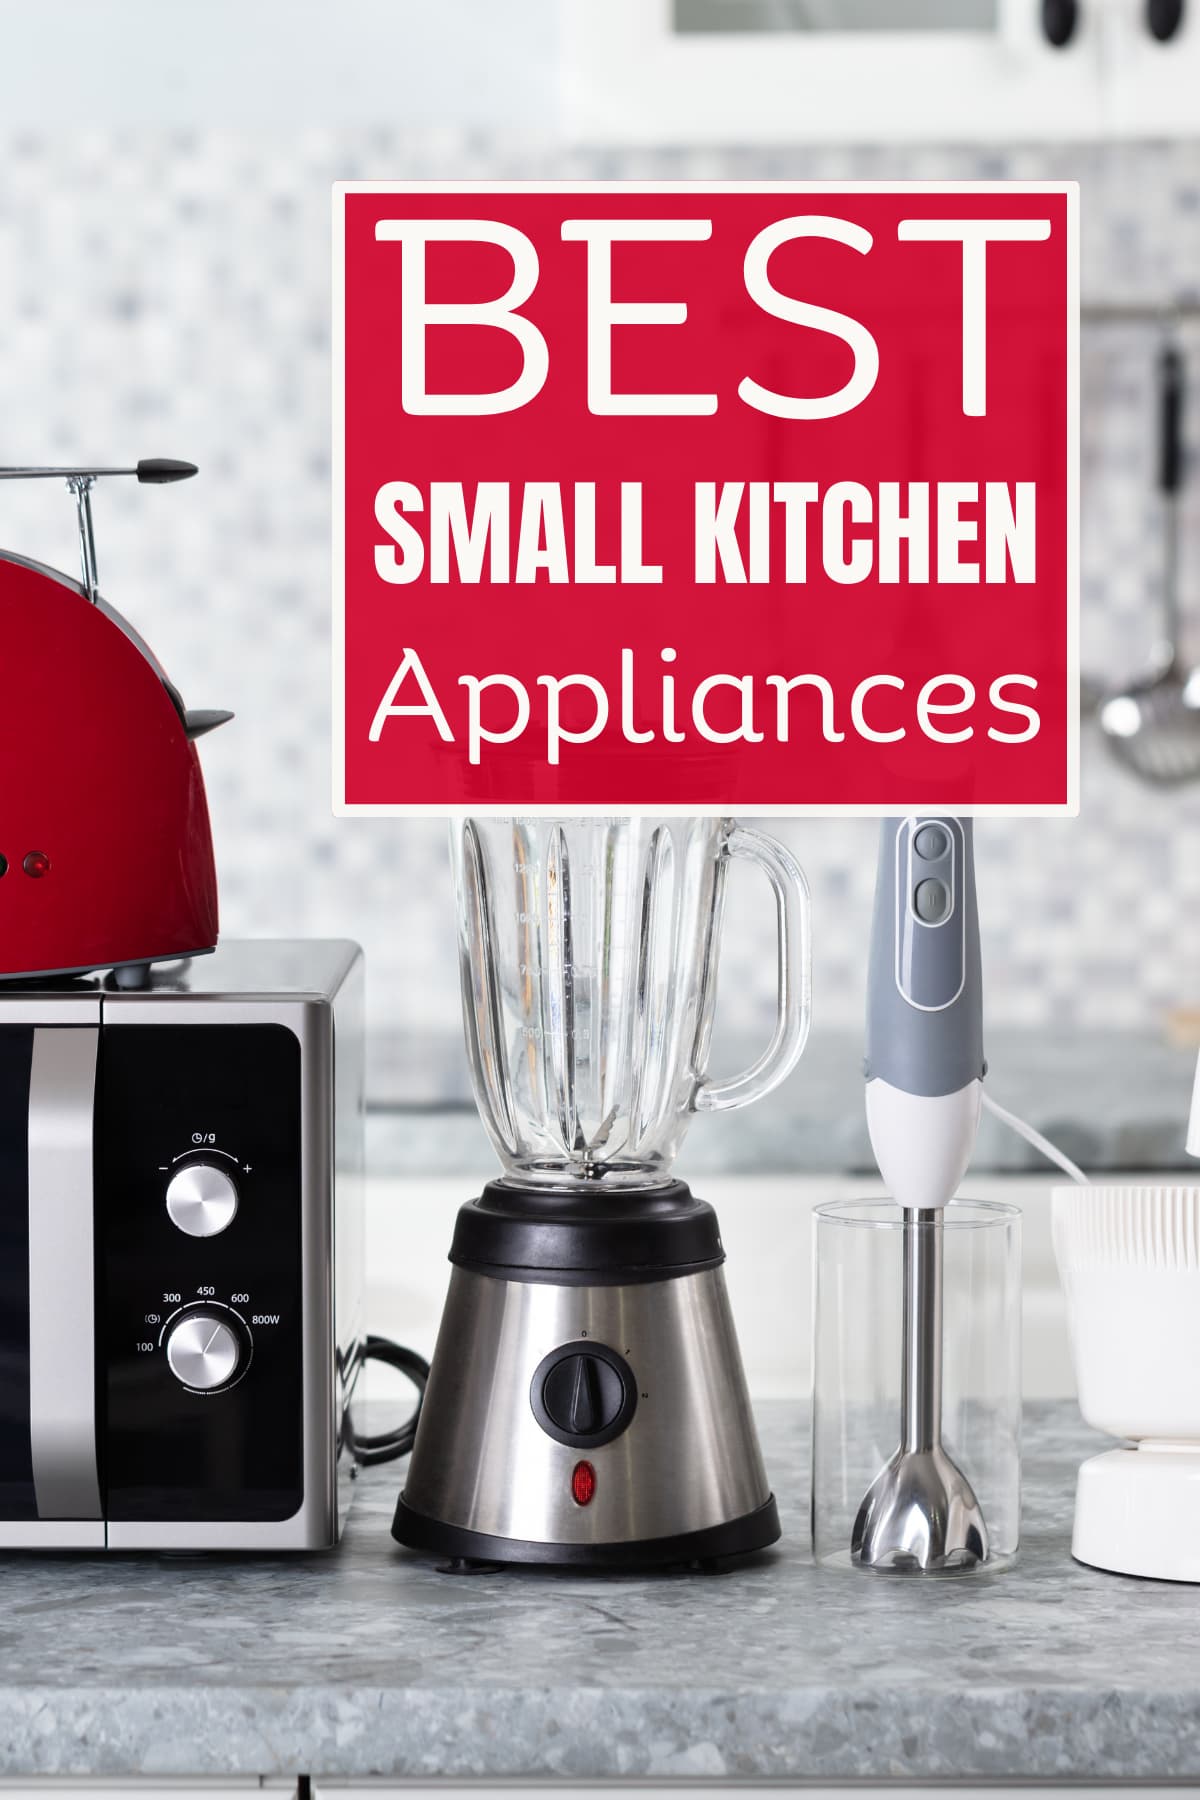 Small kitchen appliances on a counter with text overlay.